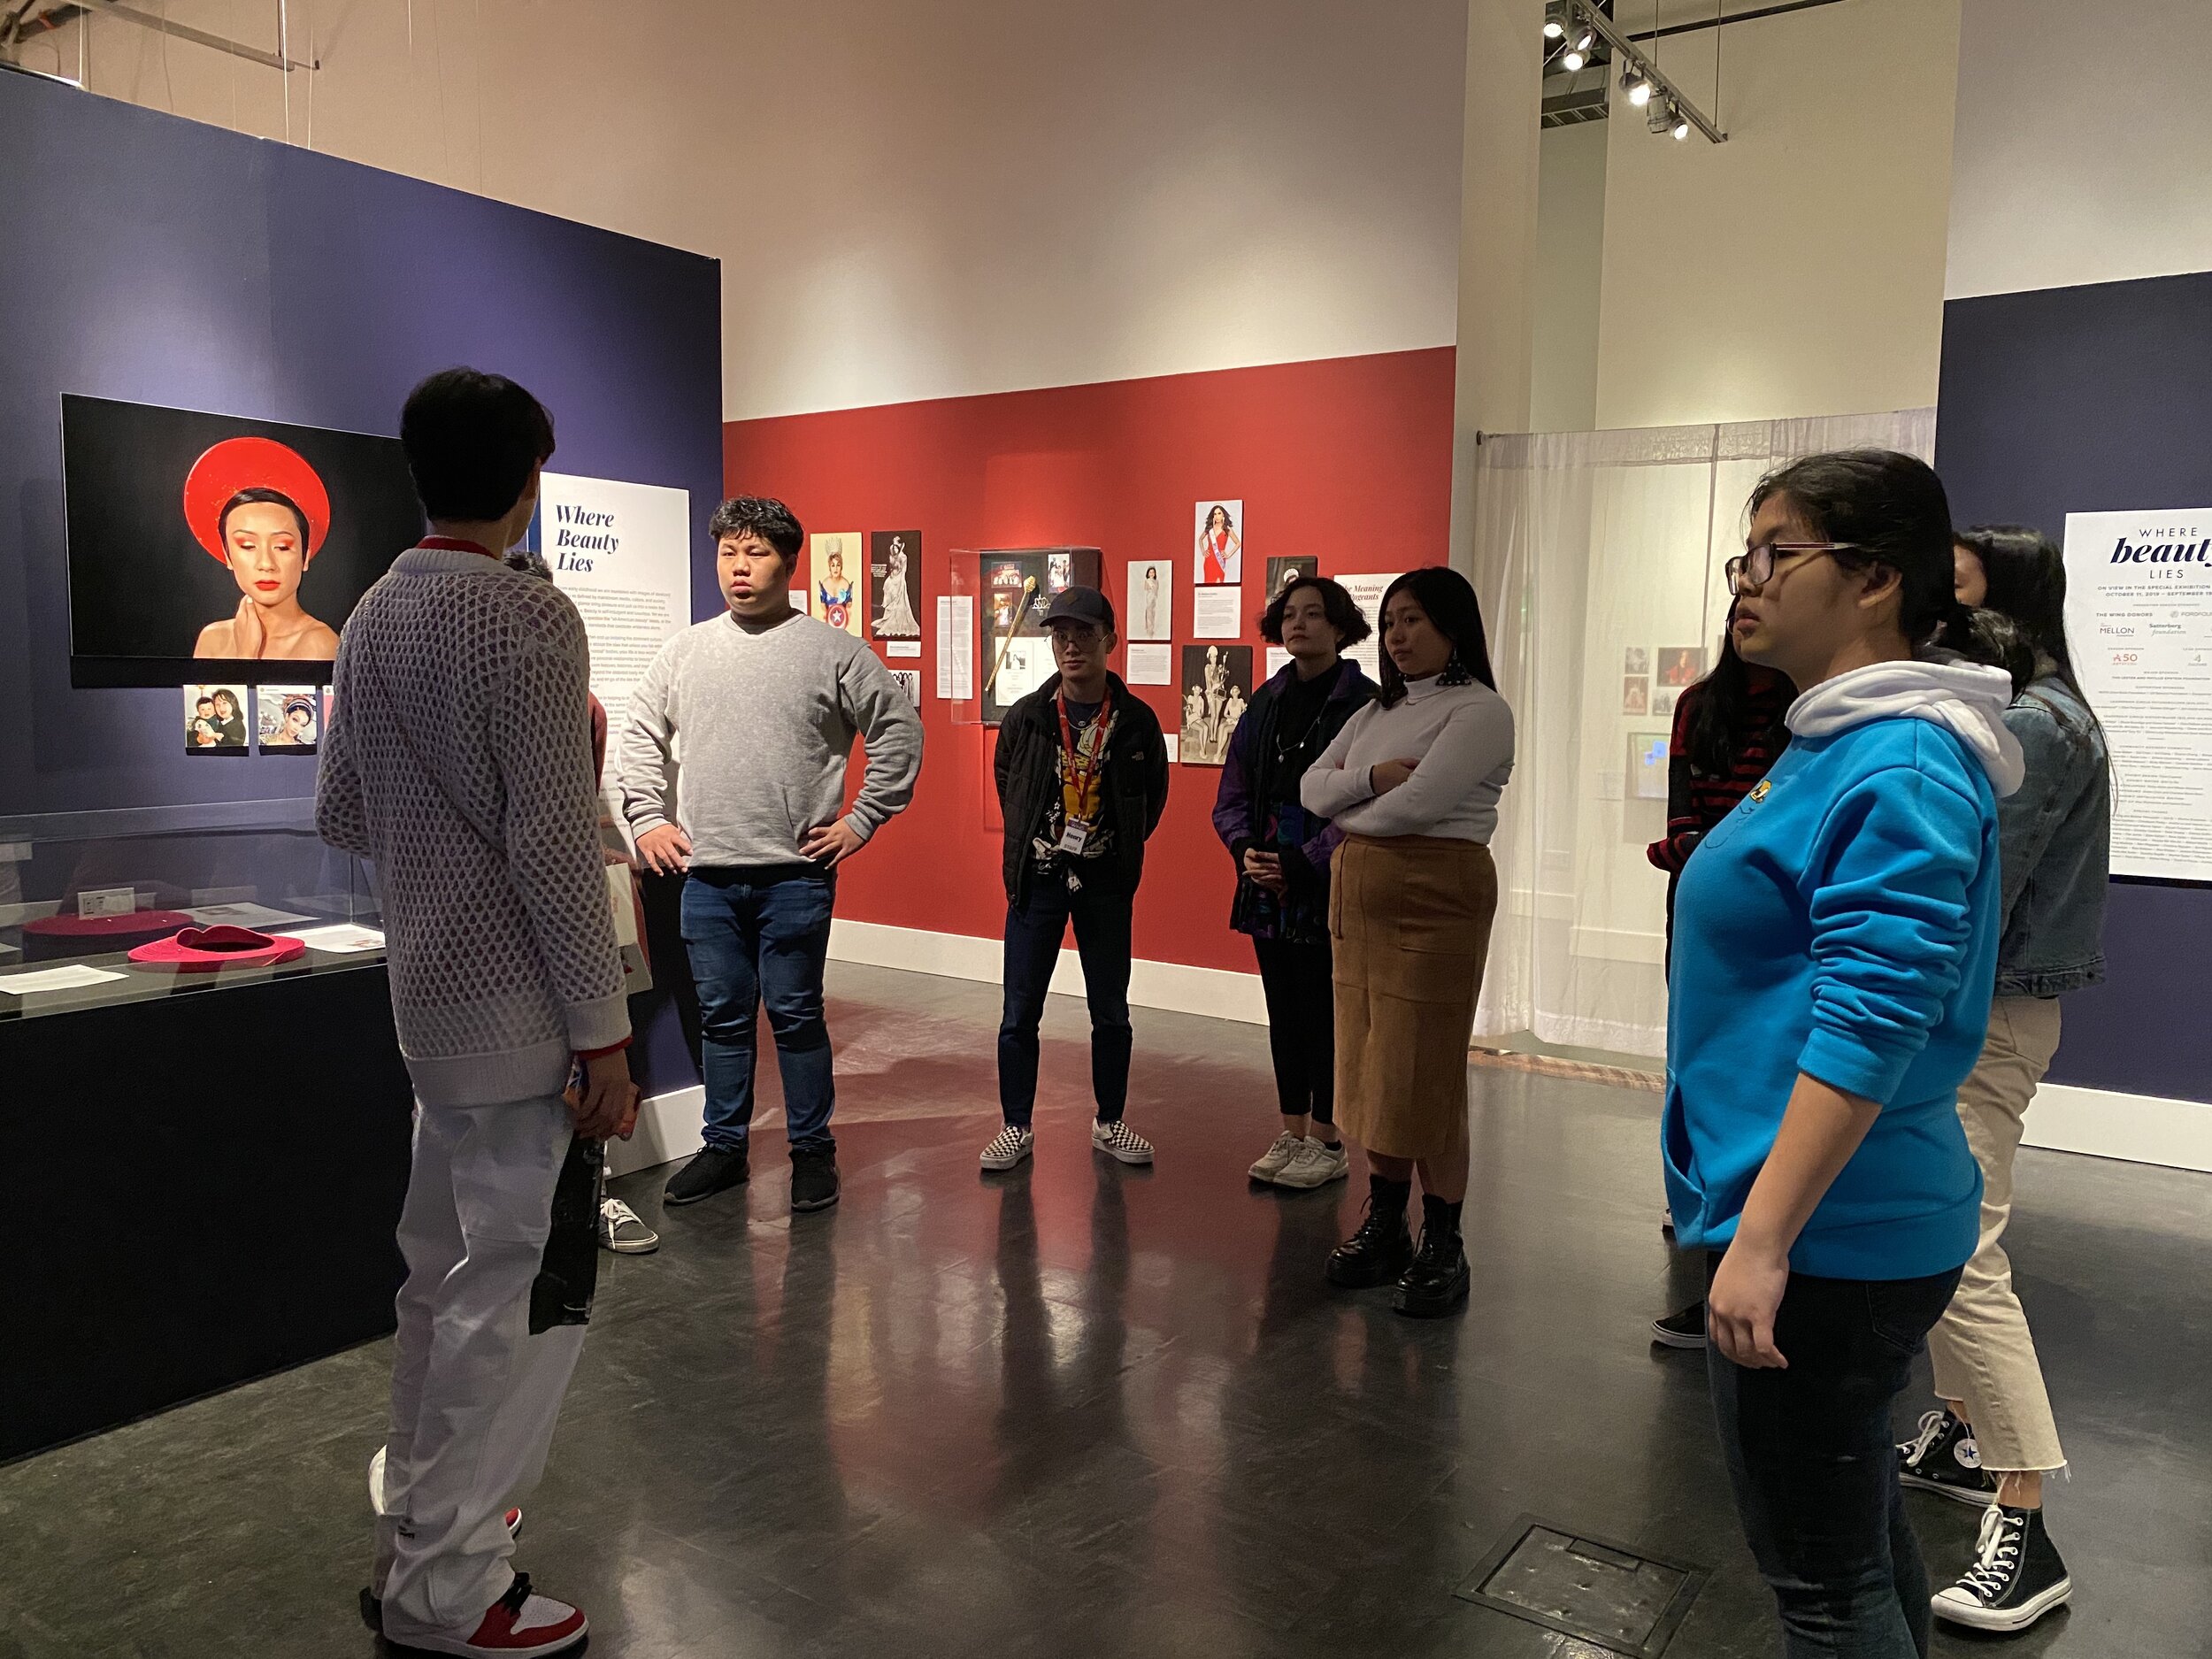  Students visit Where Lies Beauty exhibit at the Wing Luke.  